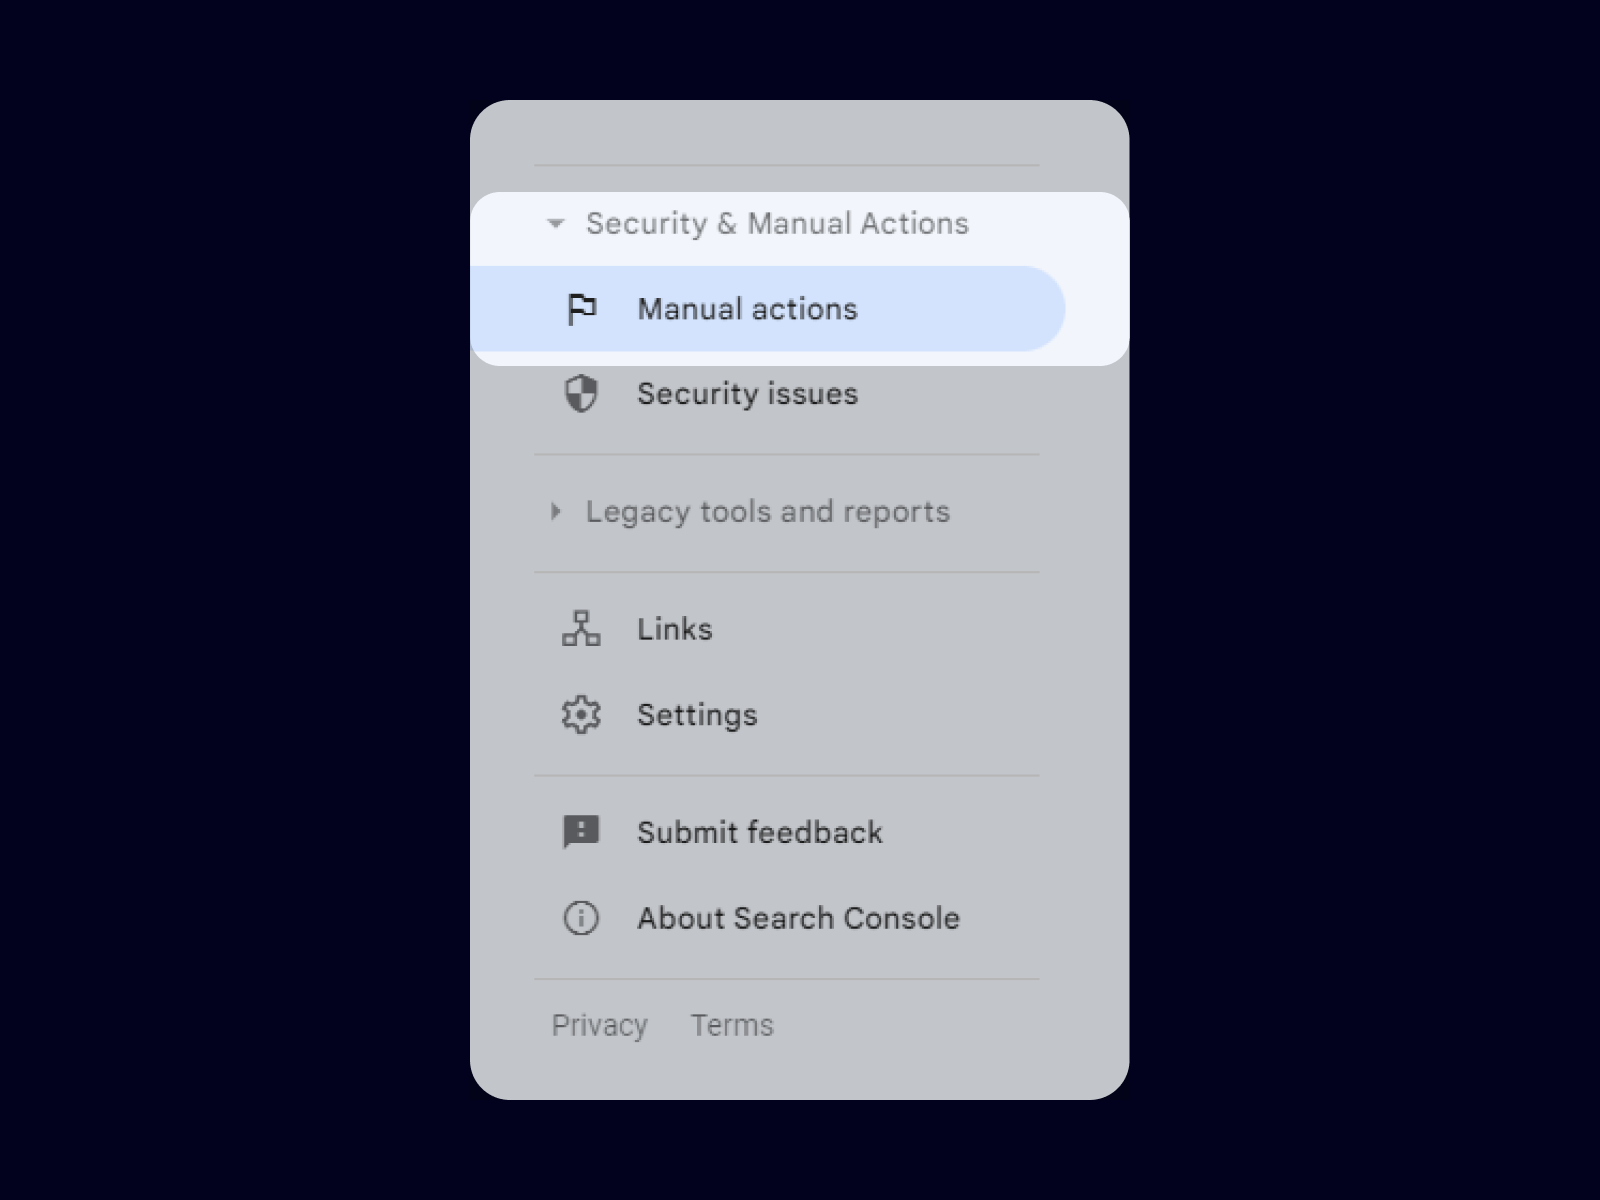 Review security issues detected on your website in “Security & Manual Actions”